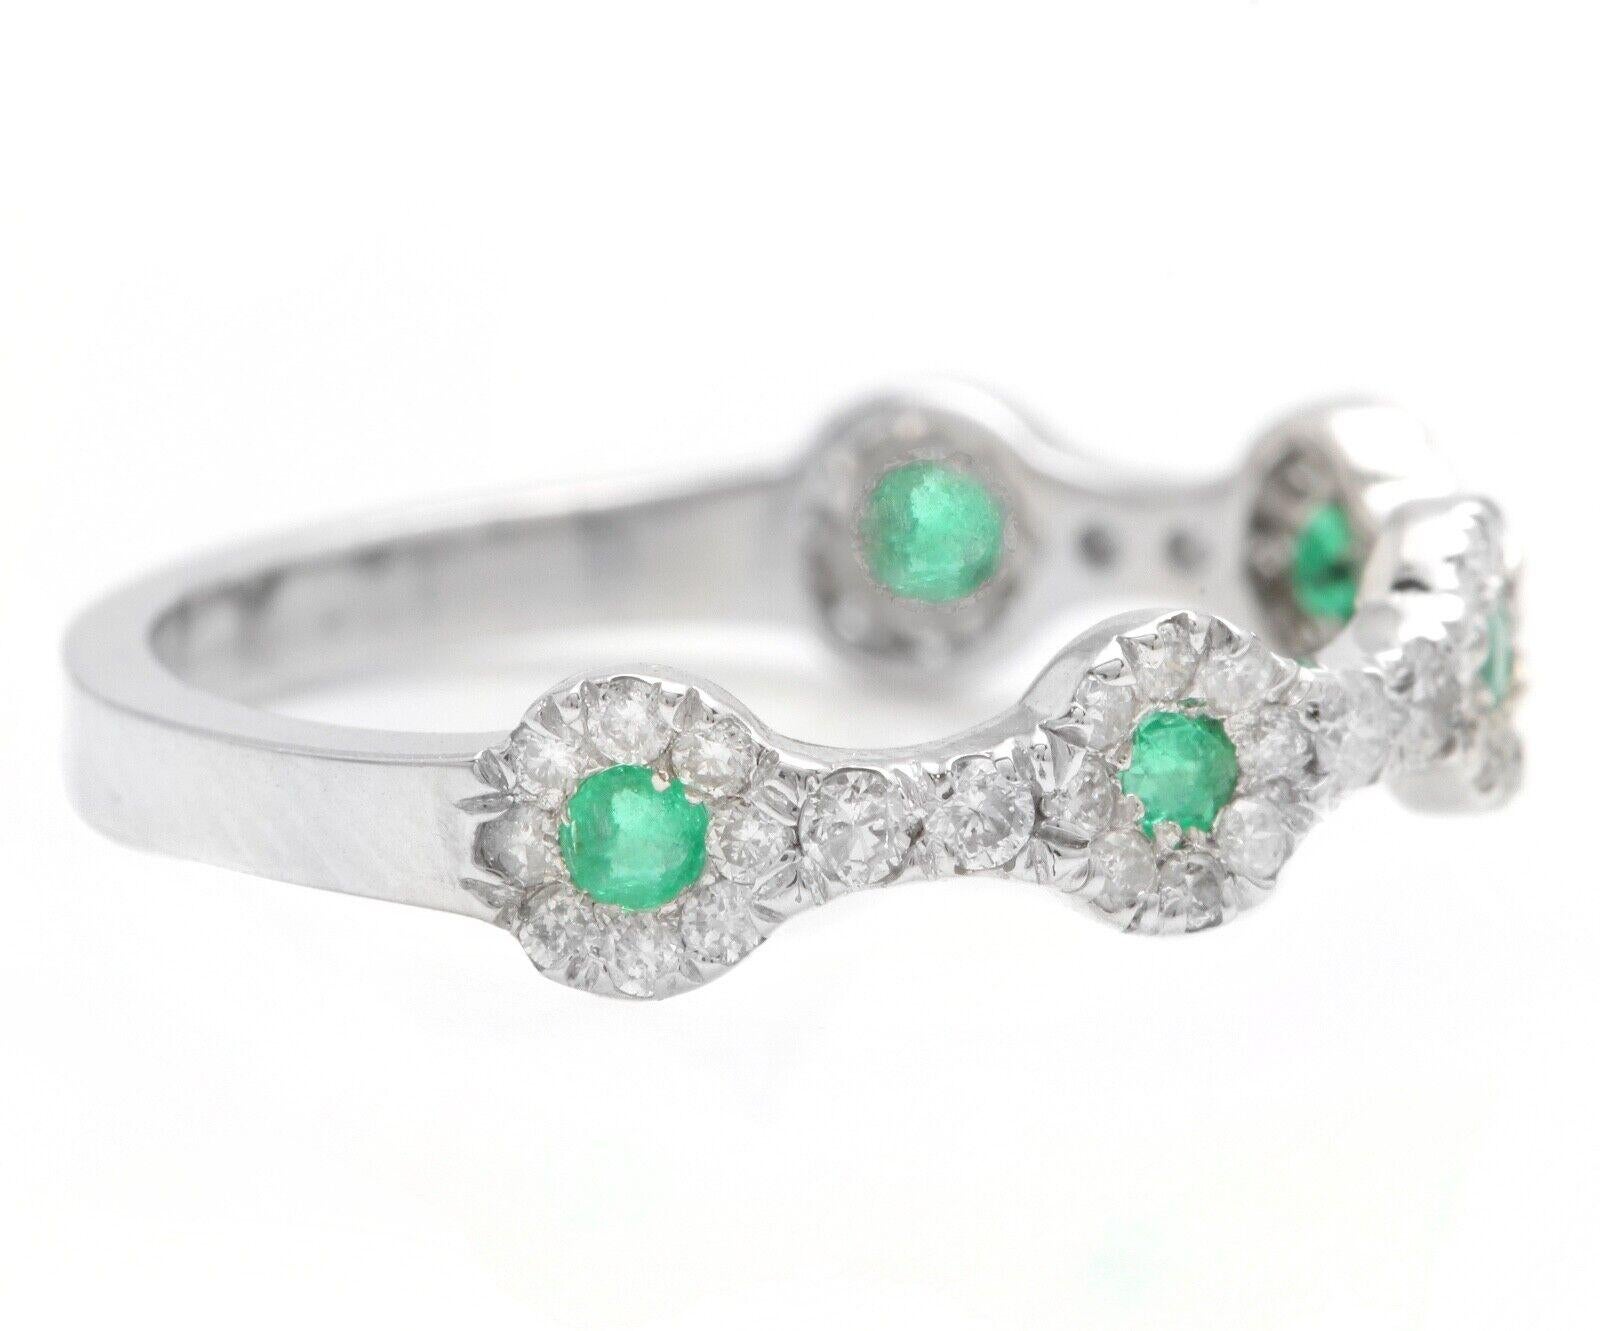 0.50 Carats Natural Emerald and Diamond 14K Solid White Gold Band Ring

Suggested Replacement Value: $3,000.00

Total Natural Green Emerald Weight is: Approx. 0.15 Carats 

Natural Round Diamonds Weight: Approx. 0.35 Carats (color G-H / Clarity